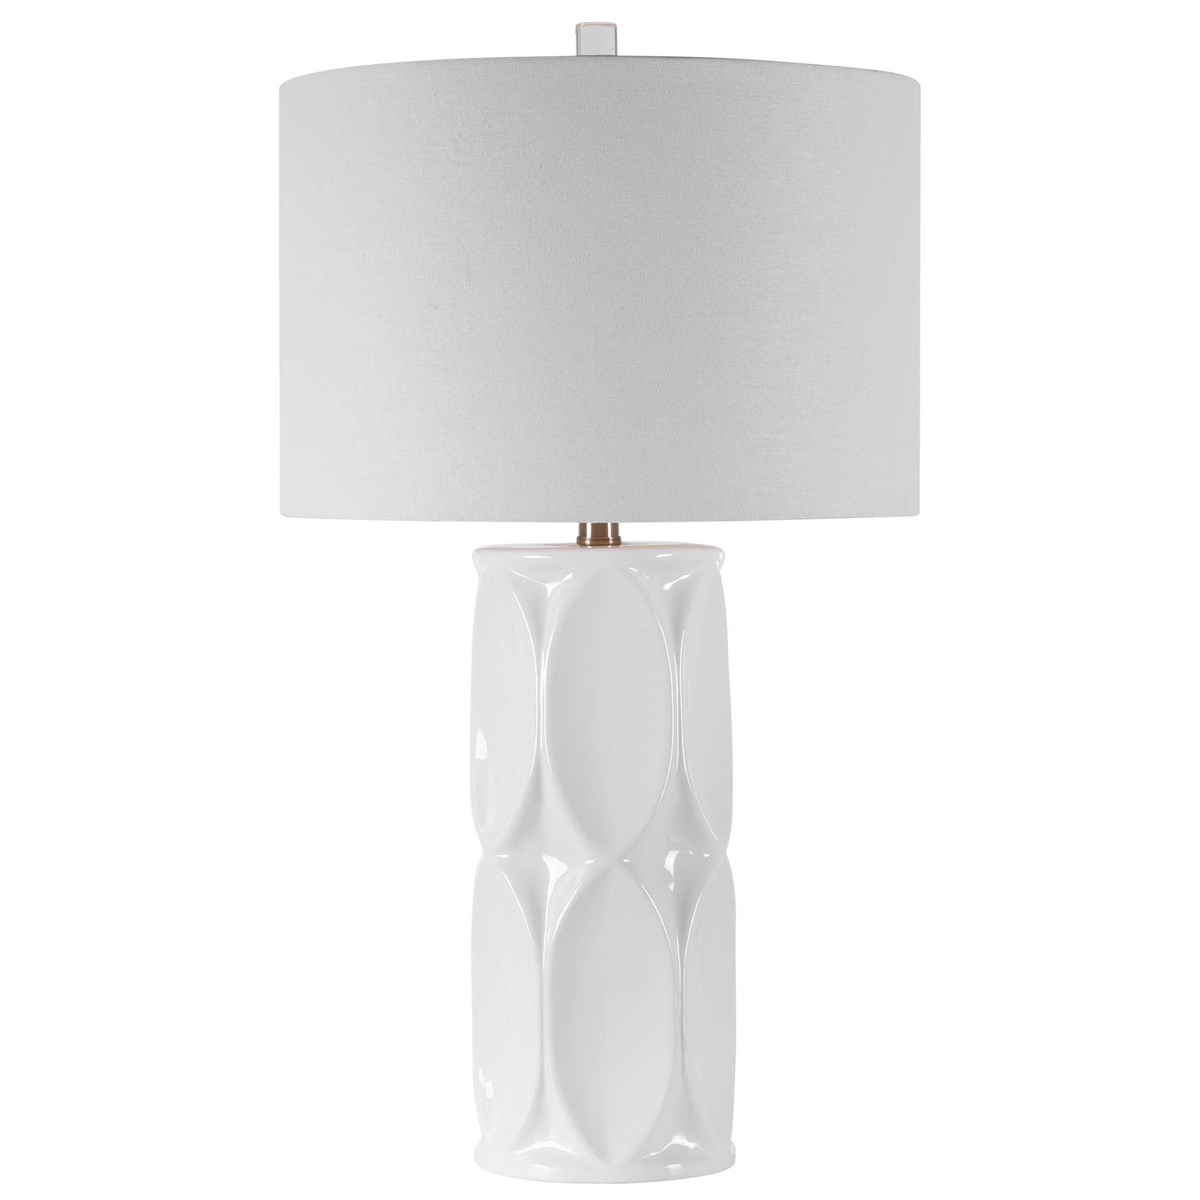 Sinclair White Table Lamp - Image 0